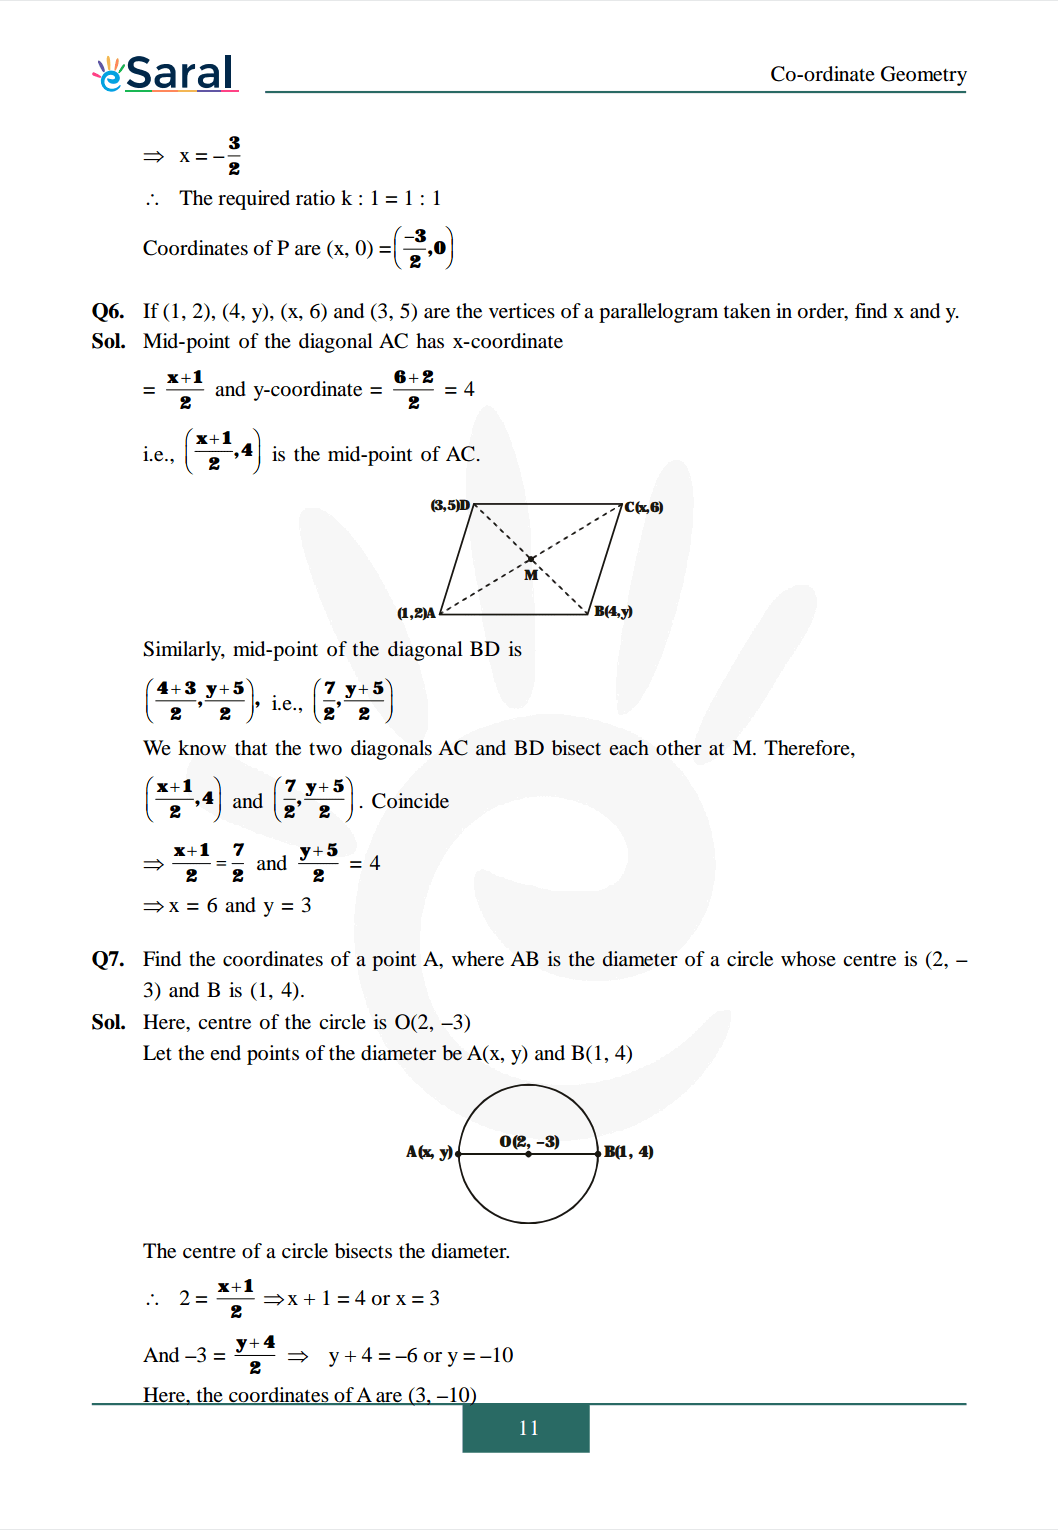 Class 10 Maths Chapter 7 exercise 7.2 solutions Image 4